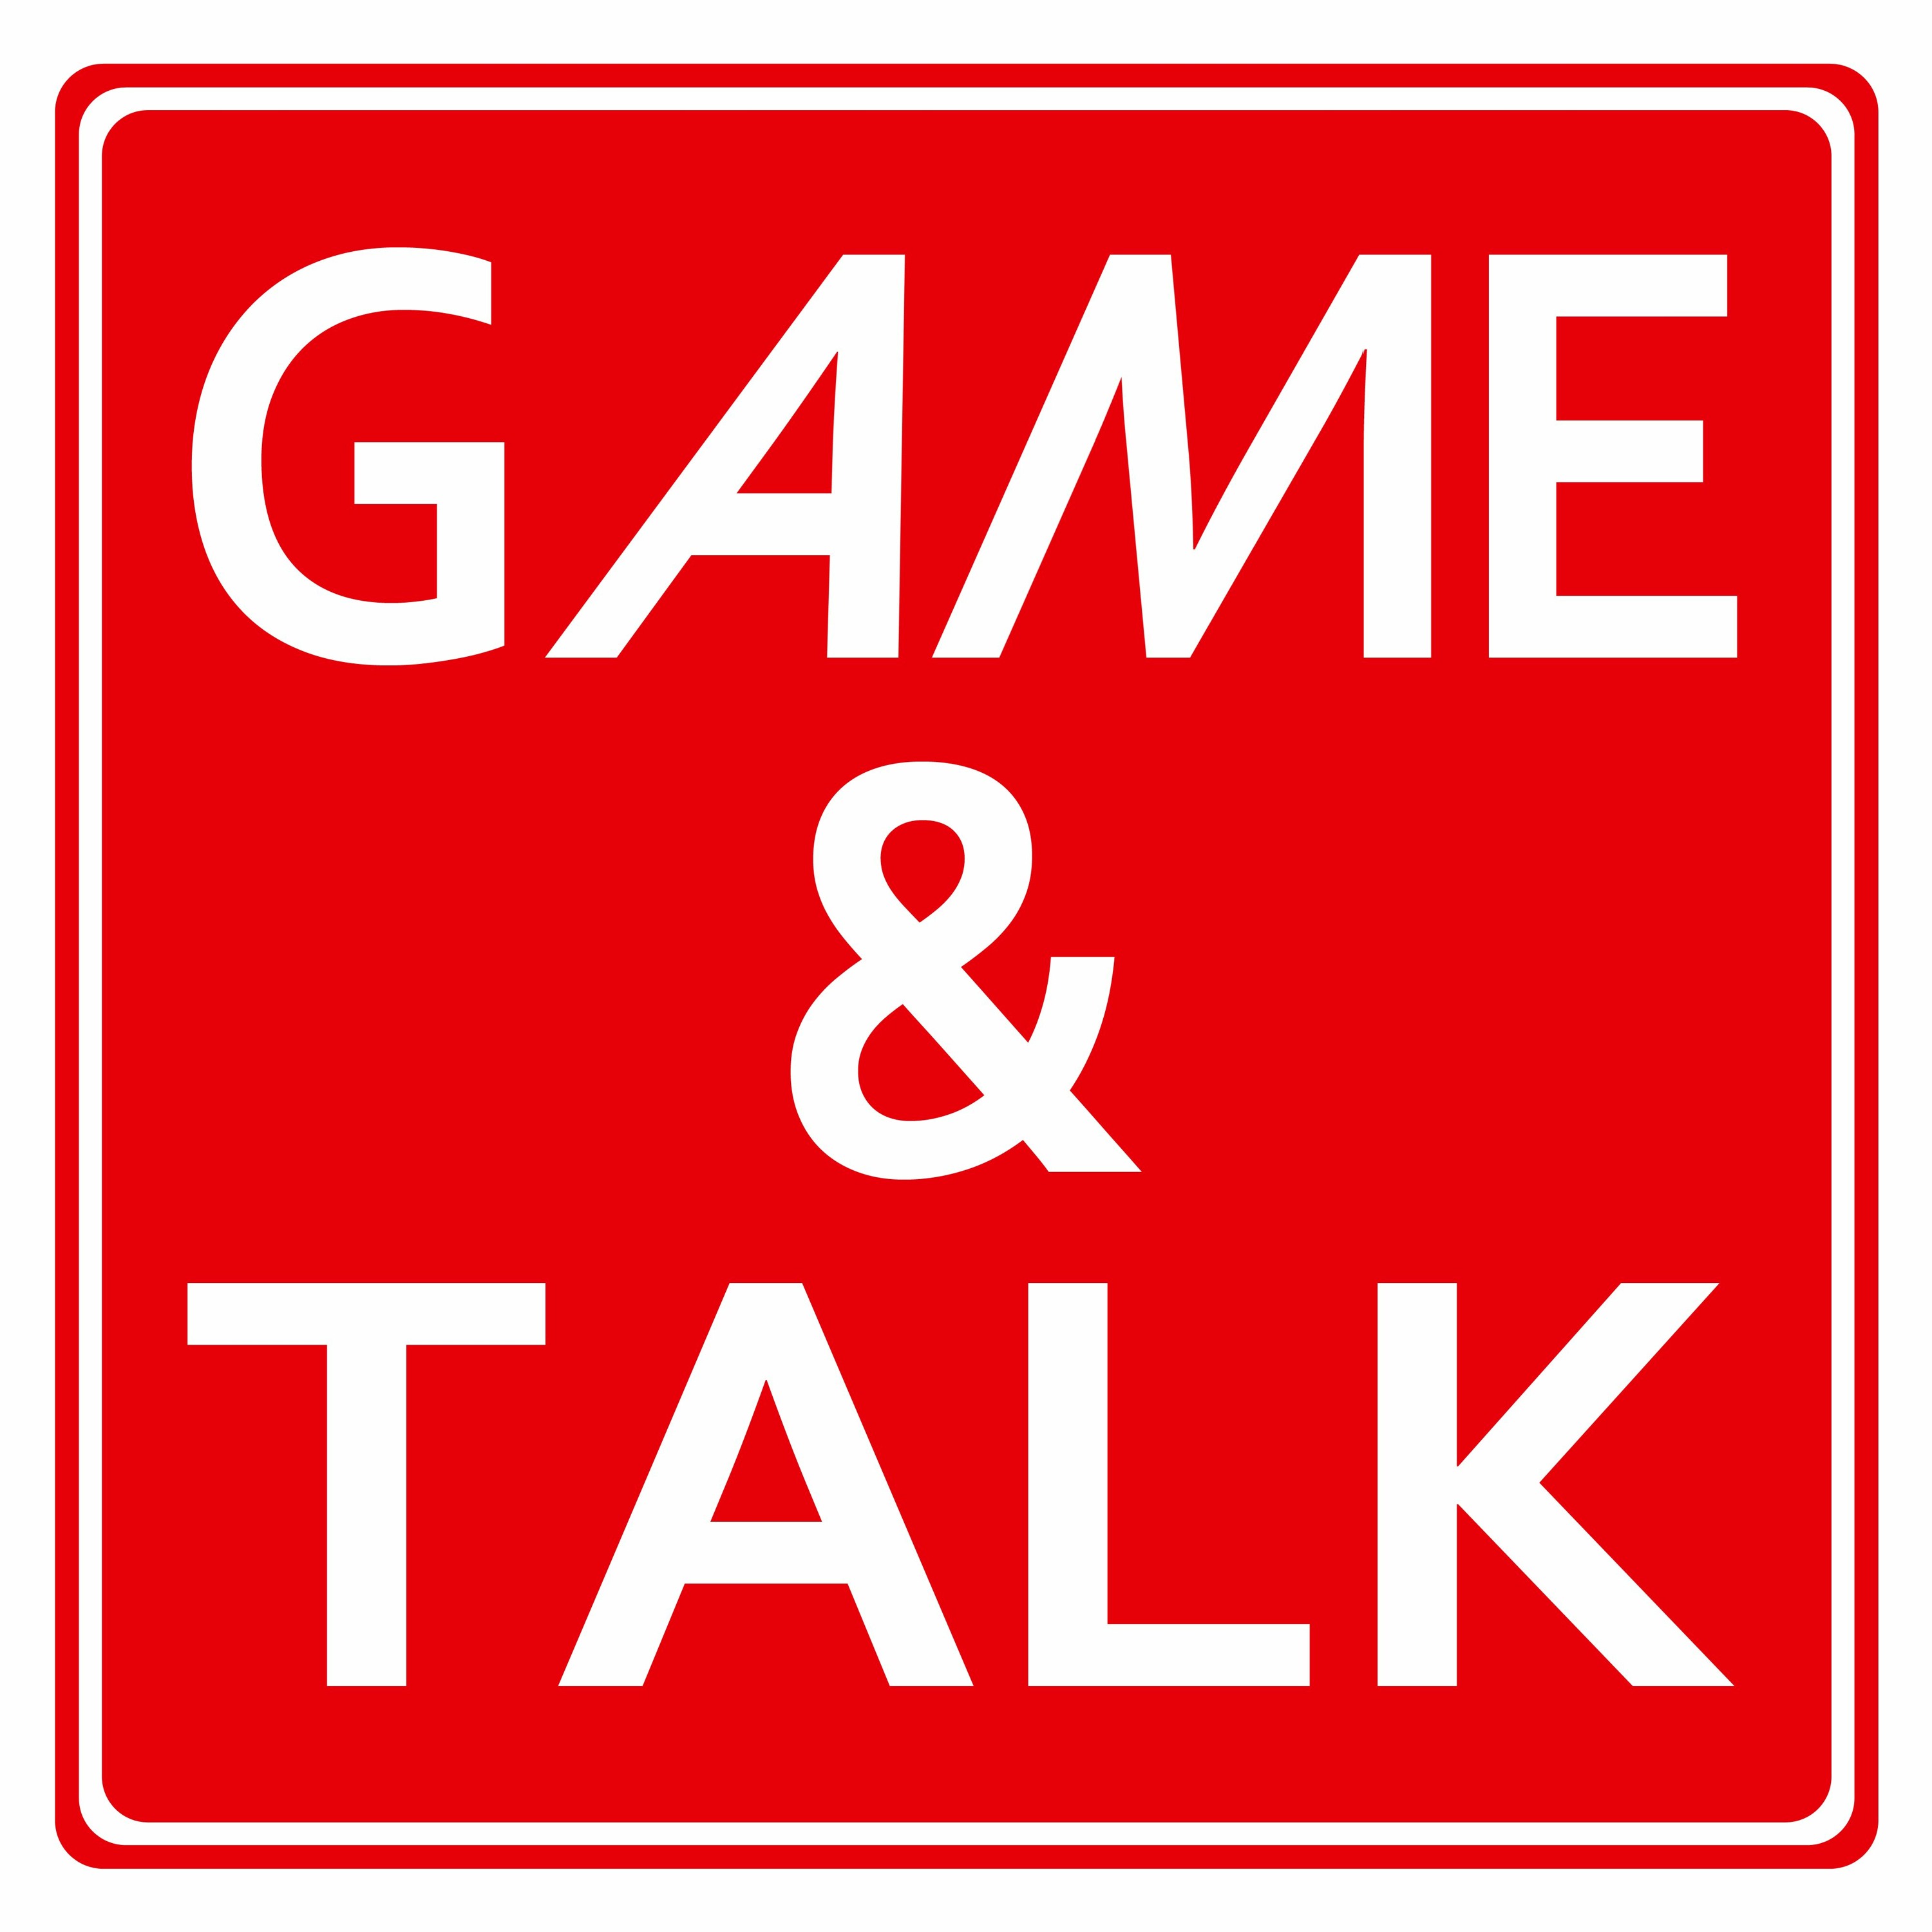 The New Voice of Mario, Sonic Superstars, The Best 2D Sonic Game | Game & Talk #9